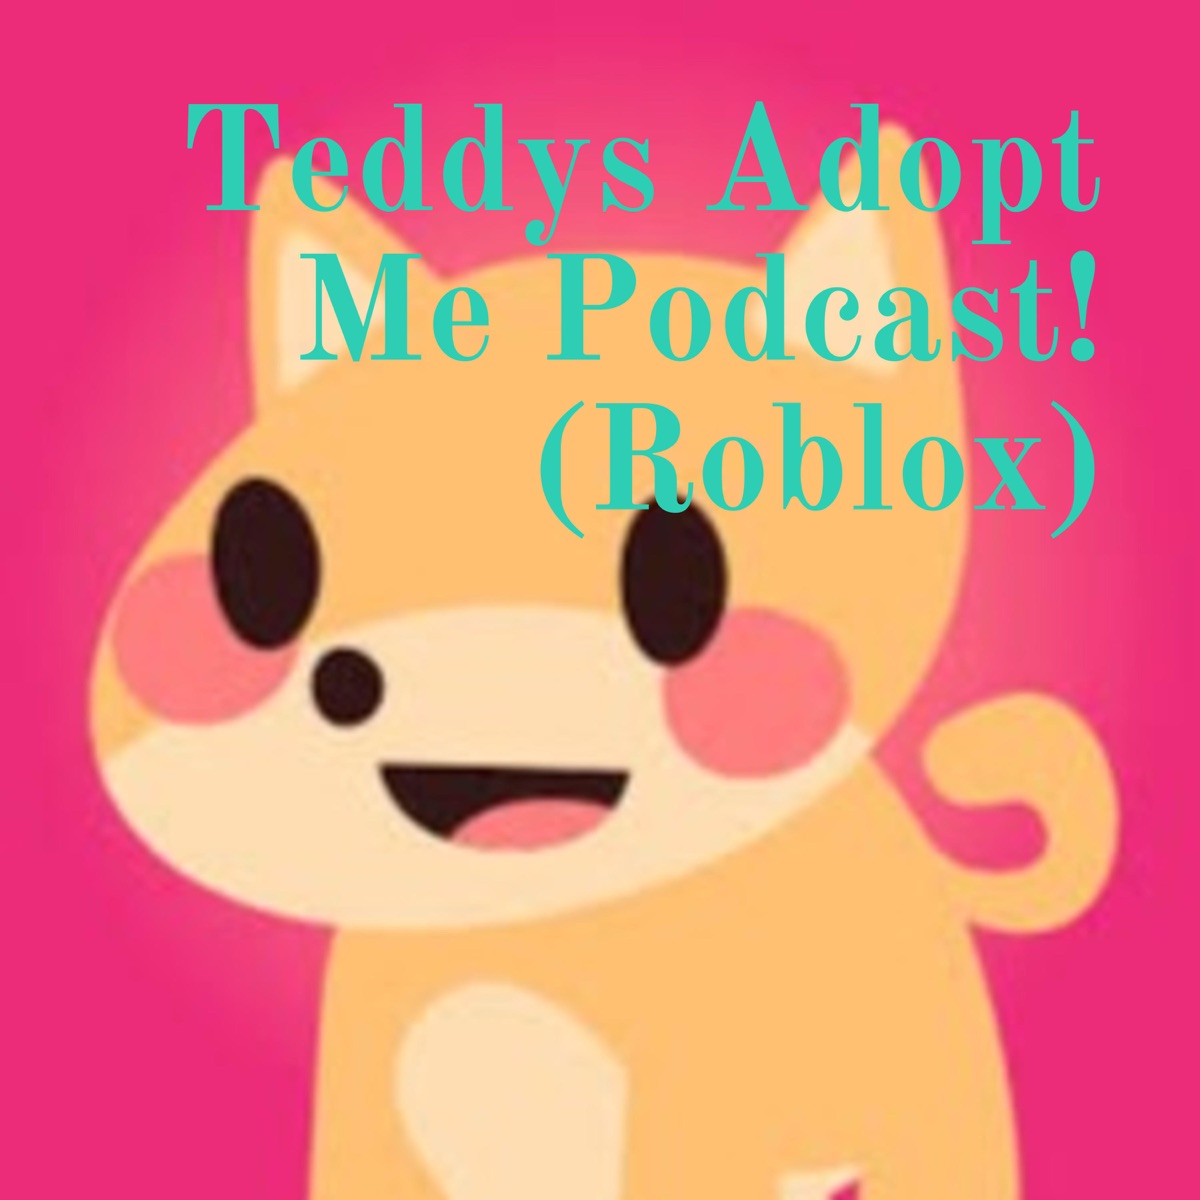 LEGENDARY PETS PART 2!!!! by Teddys Adopt Me Podcast! (Roblox)